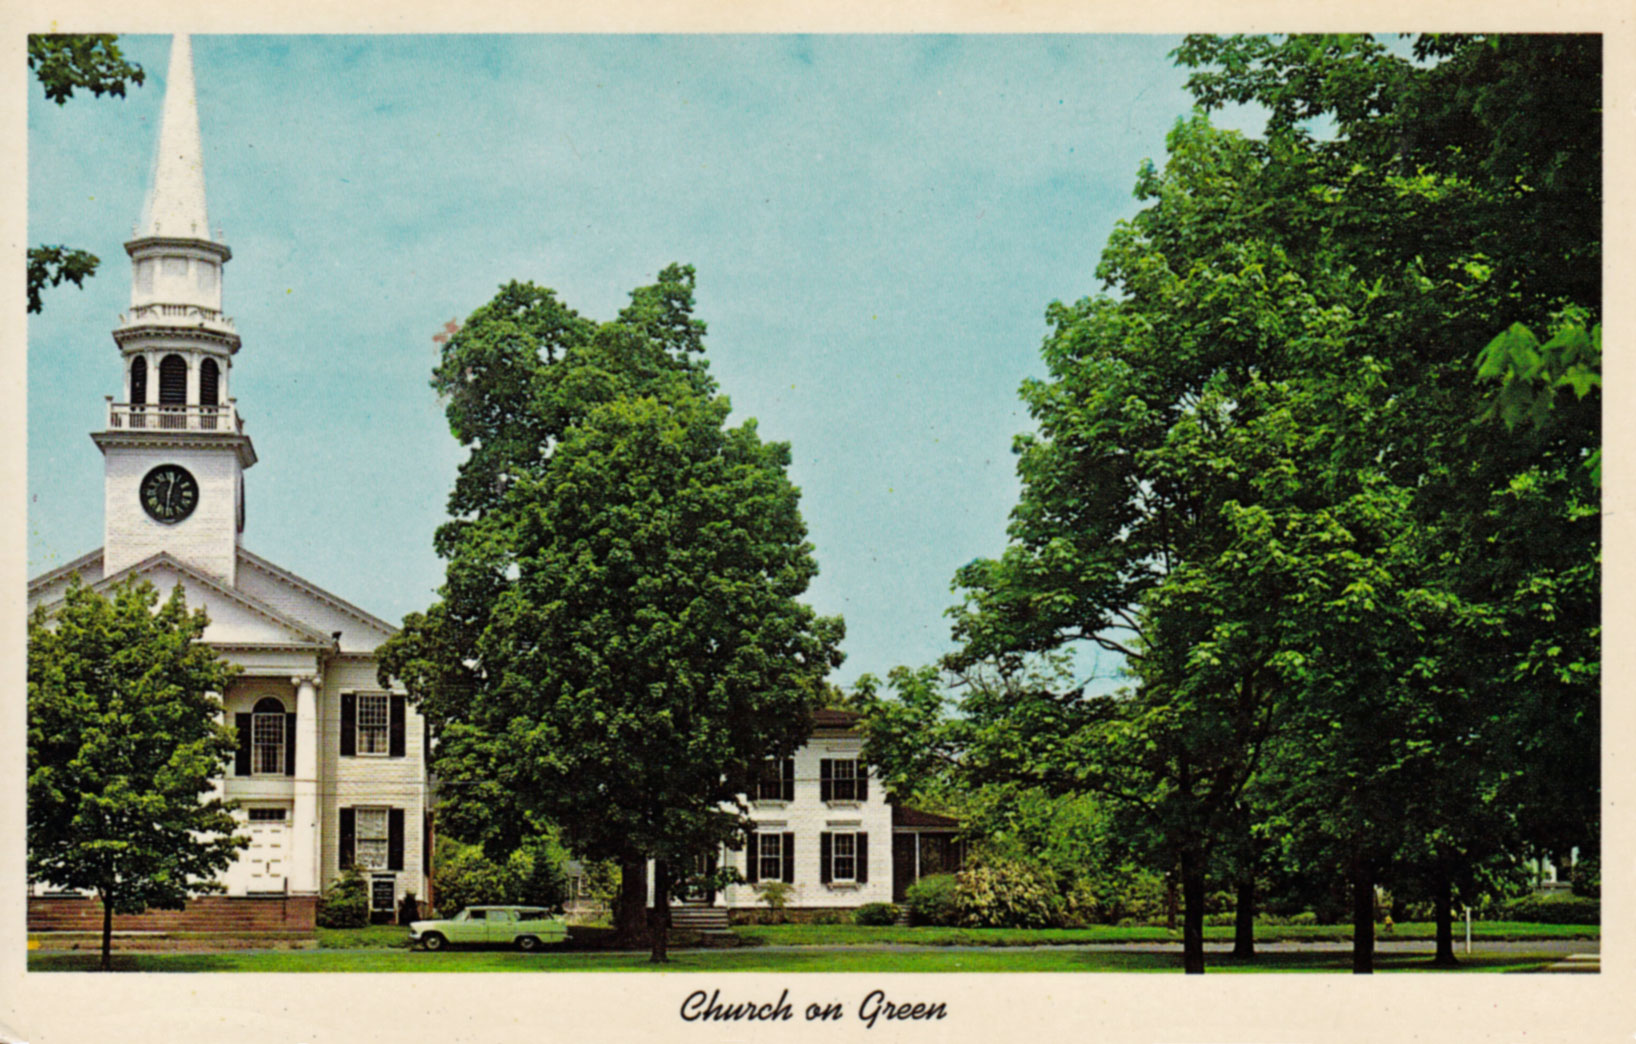 Guilford – CT Postcards.net